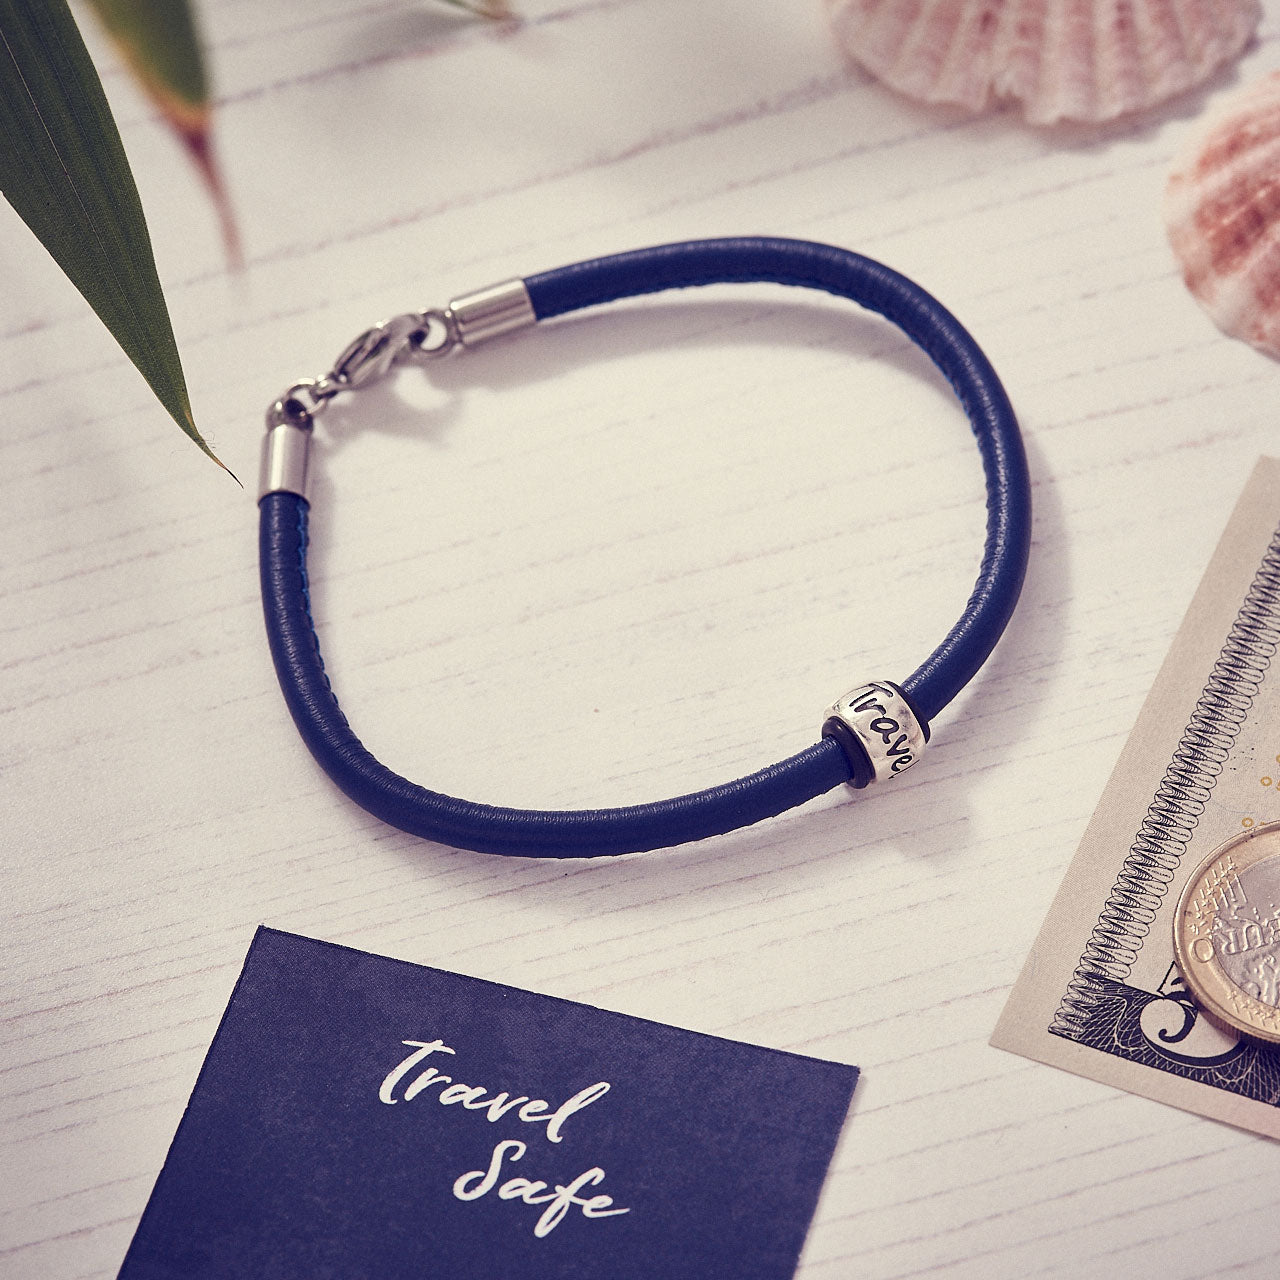 Travel Safe Silver & Italian Stitched Leather Bracelet Navy Blue - alternative travel gift from Off The map Brighton